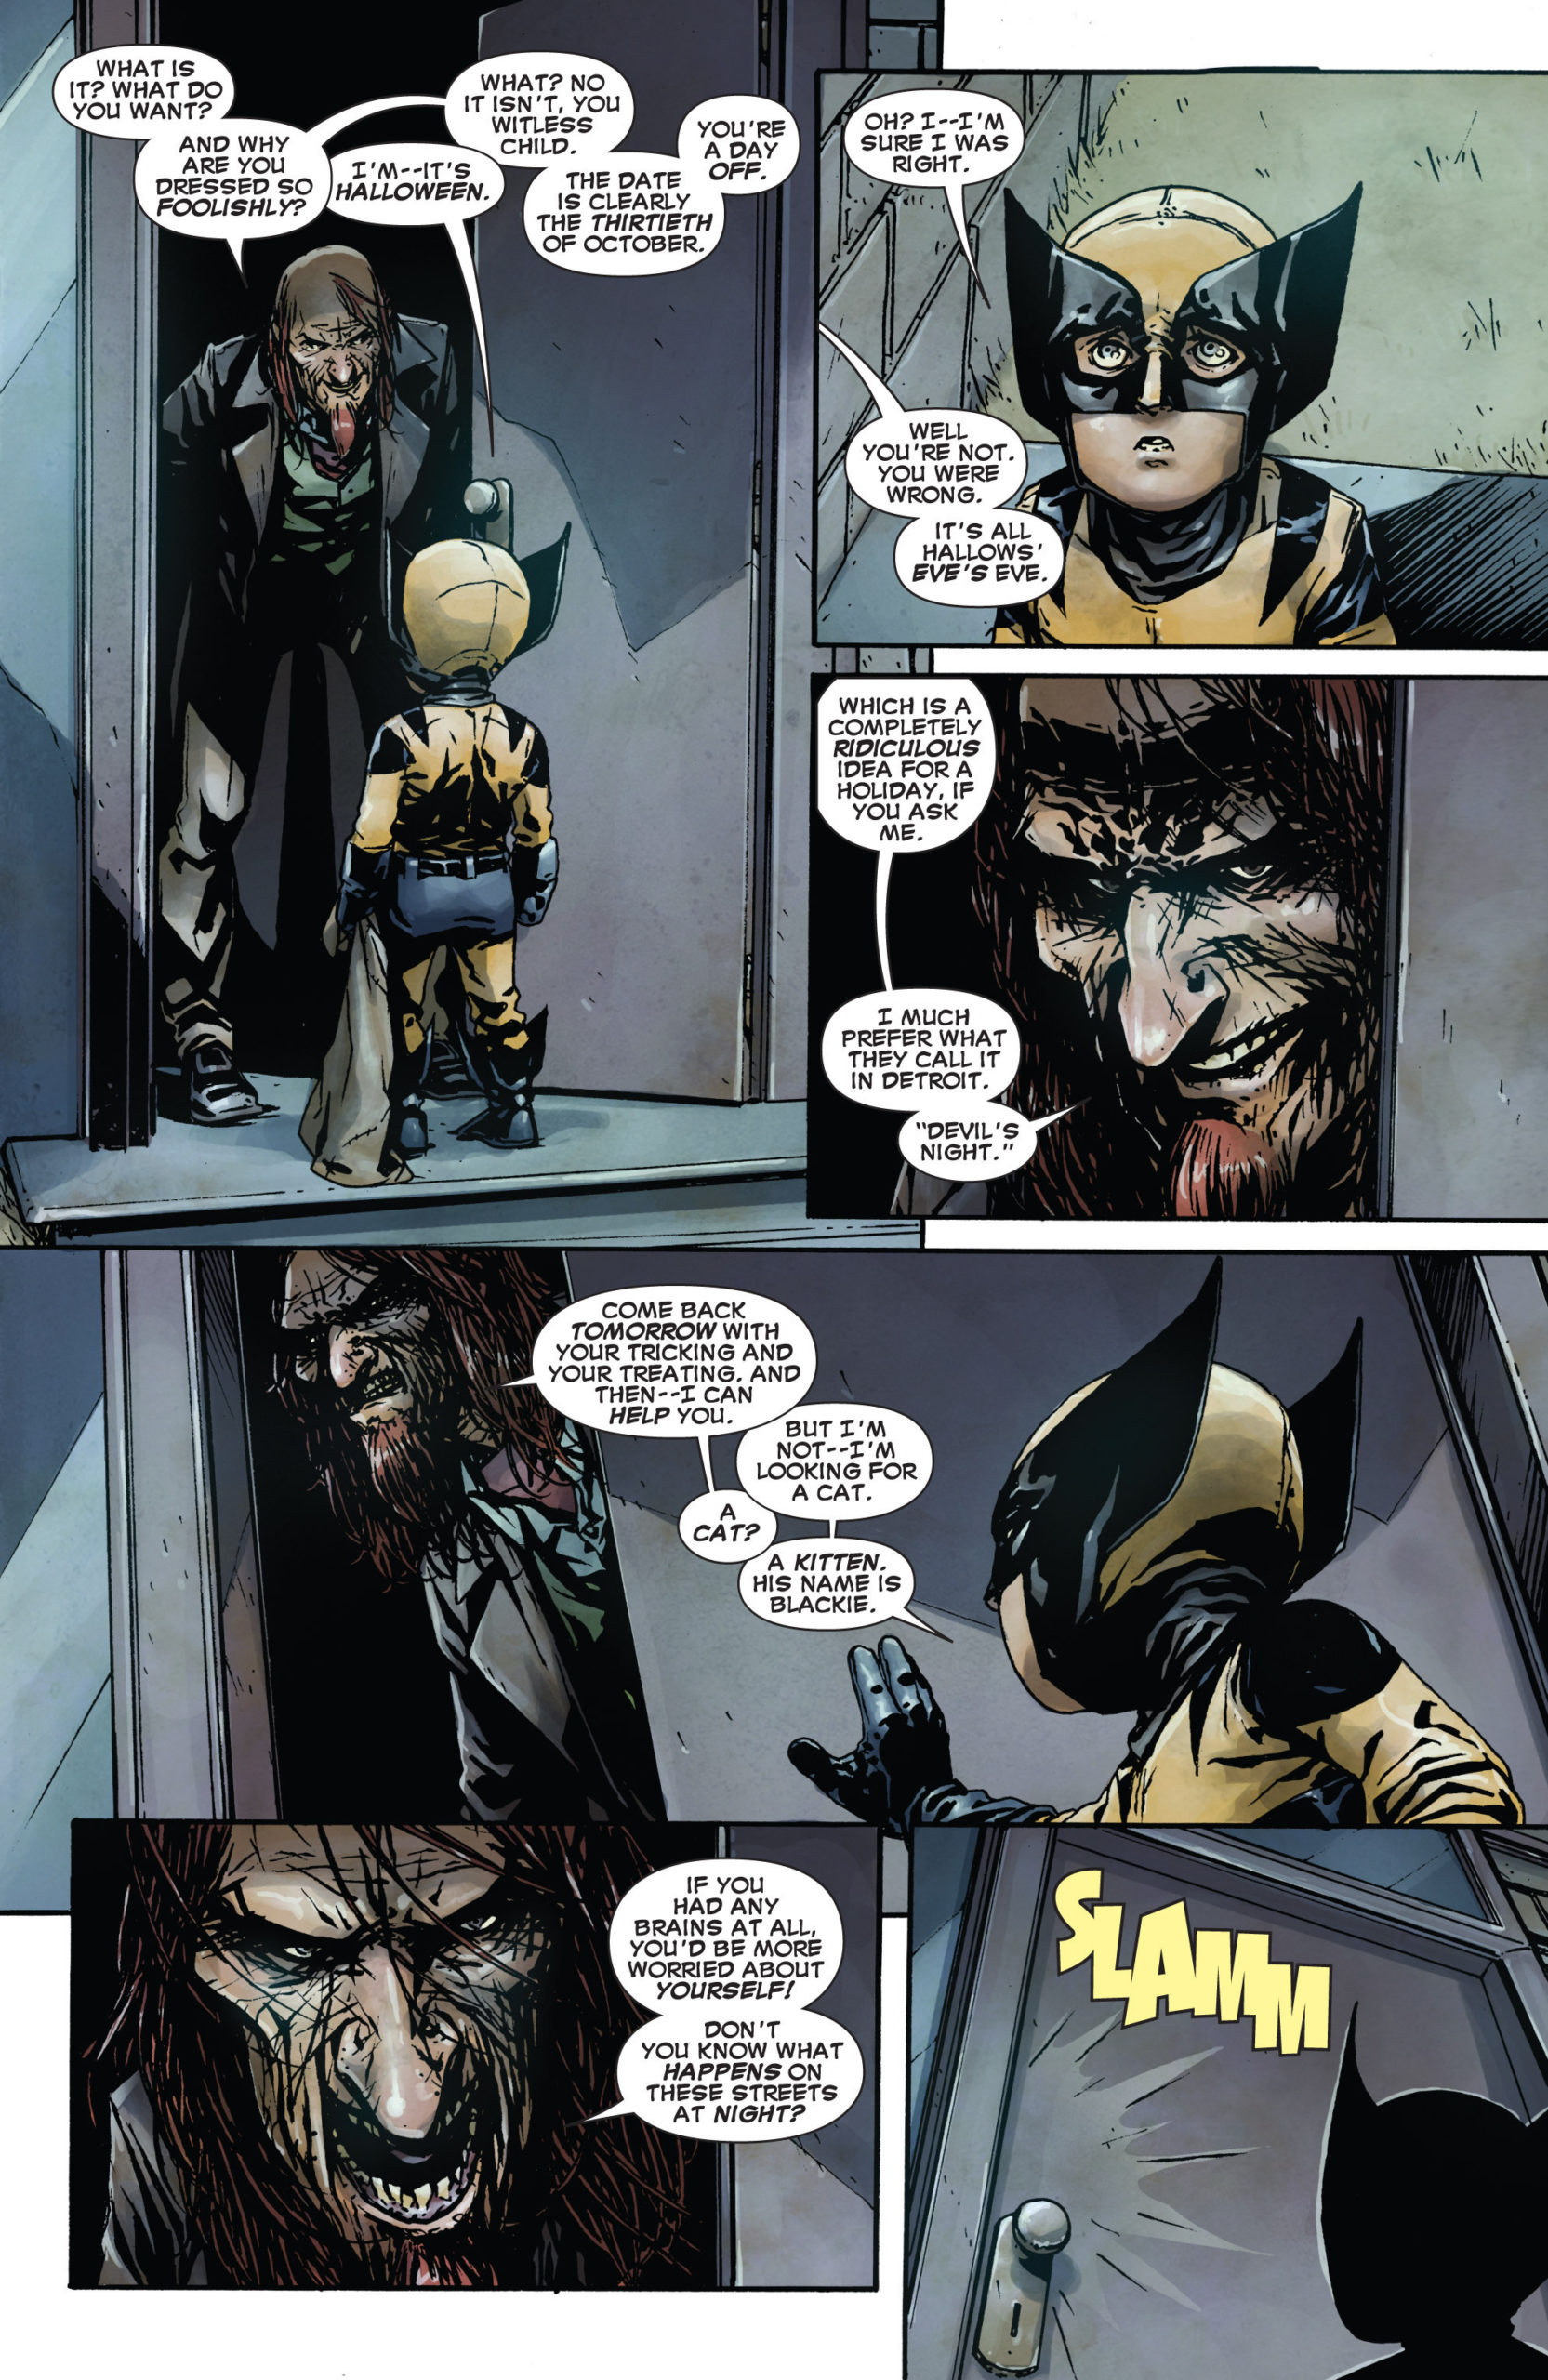 This image is from the comic; Marvel Zombies Halloween Vol 1 #1 (2012), where Peter approaches Mephisto while searching for his cat, Blackie. 